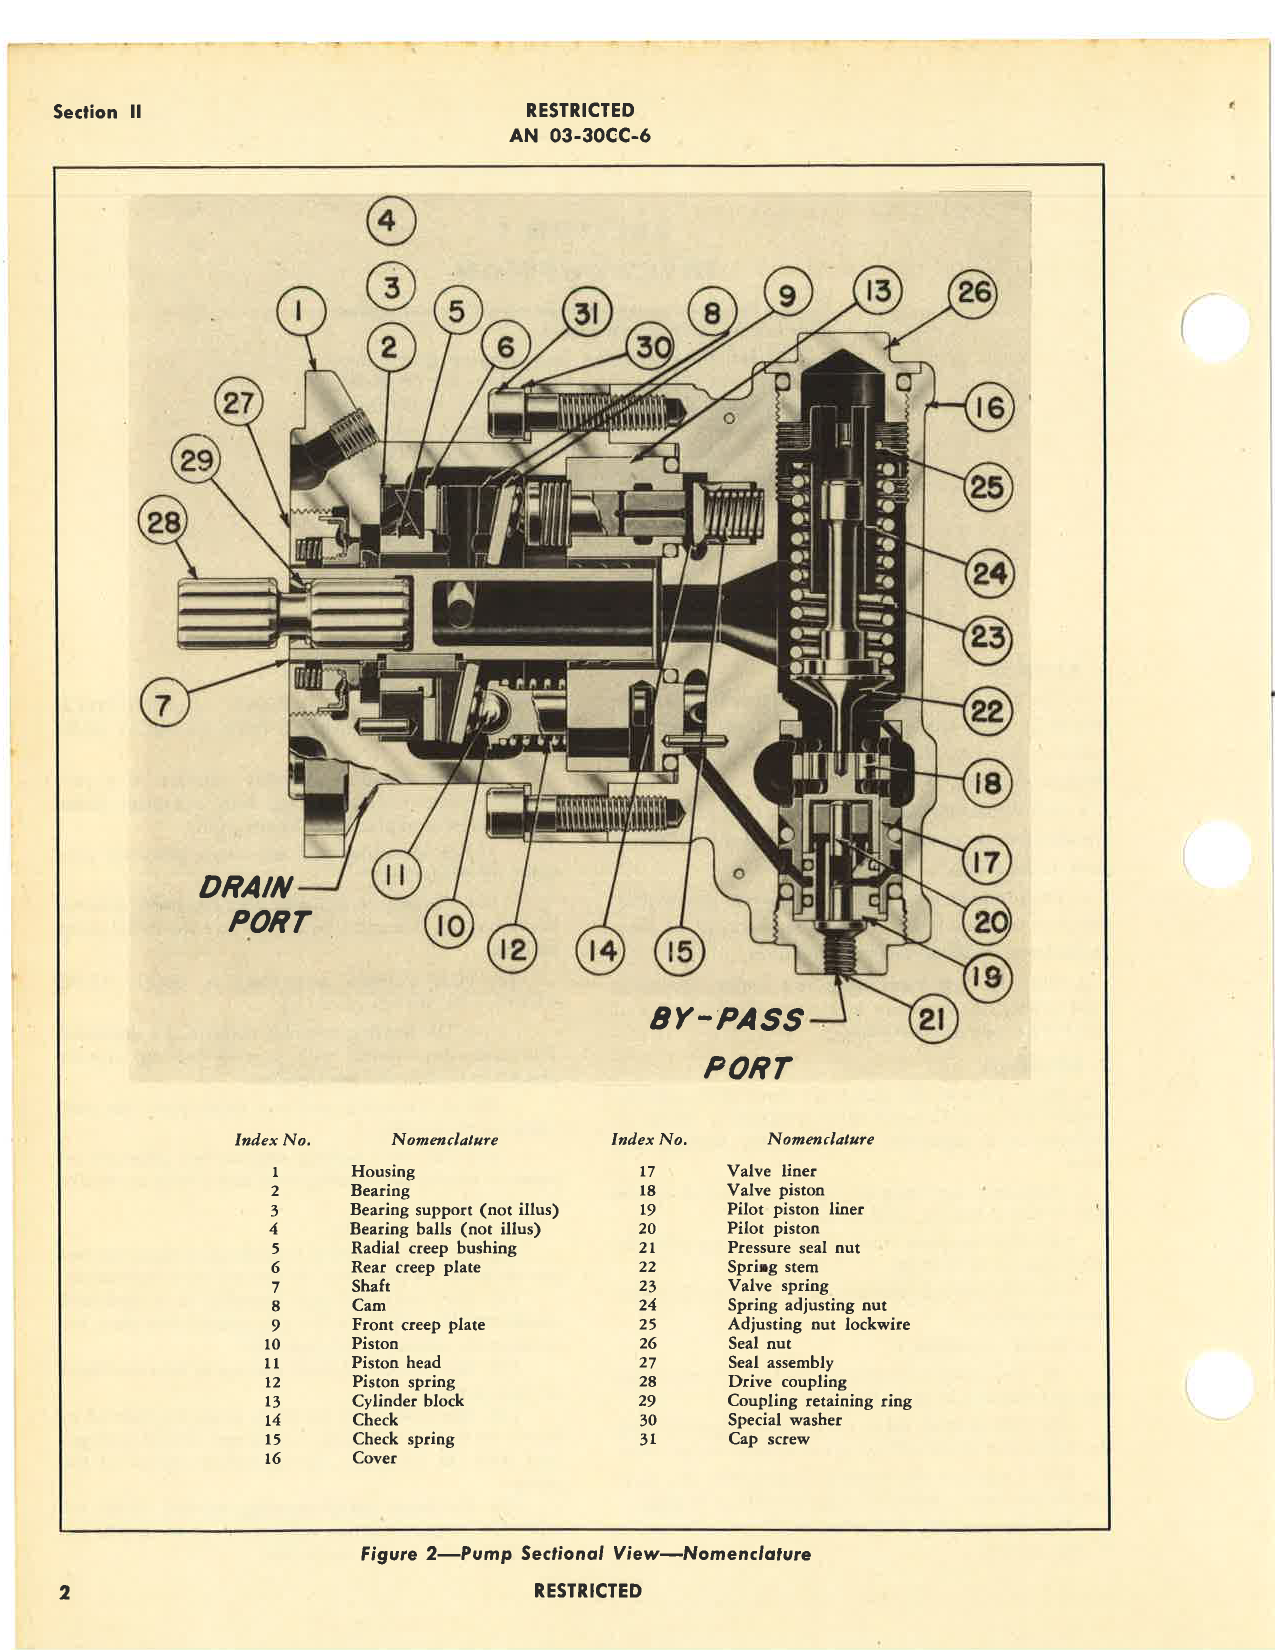 Sample page 6 from AirCorps Library document: Handbook of Overhaul Instructions with Parts Catalog for Model Series 68 Stratopower Hydraulic Pumps